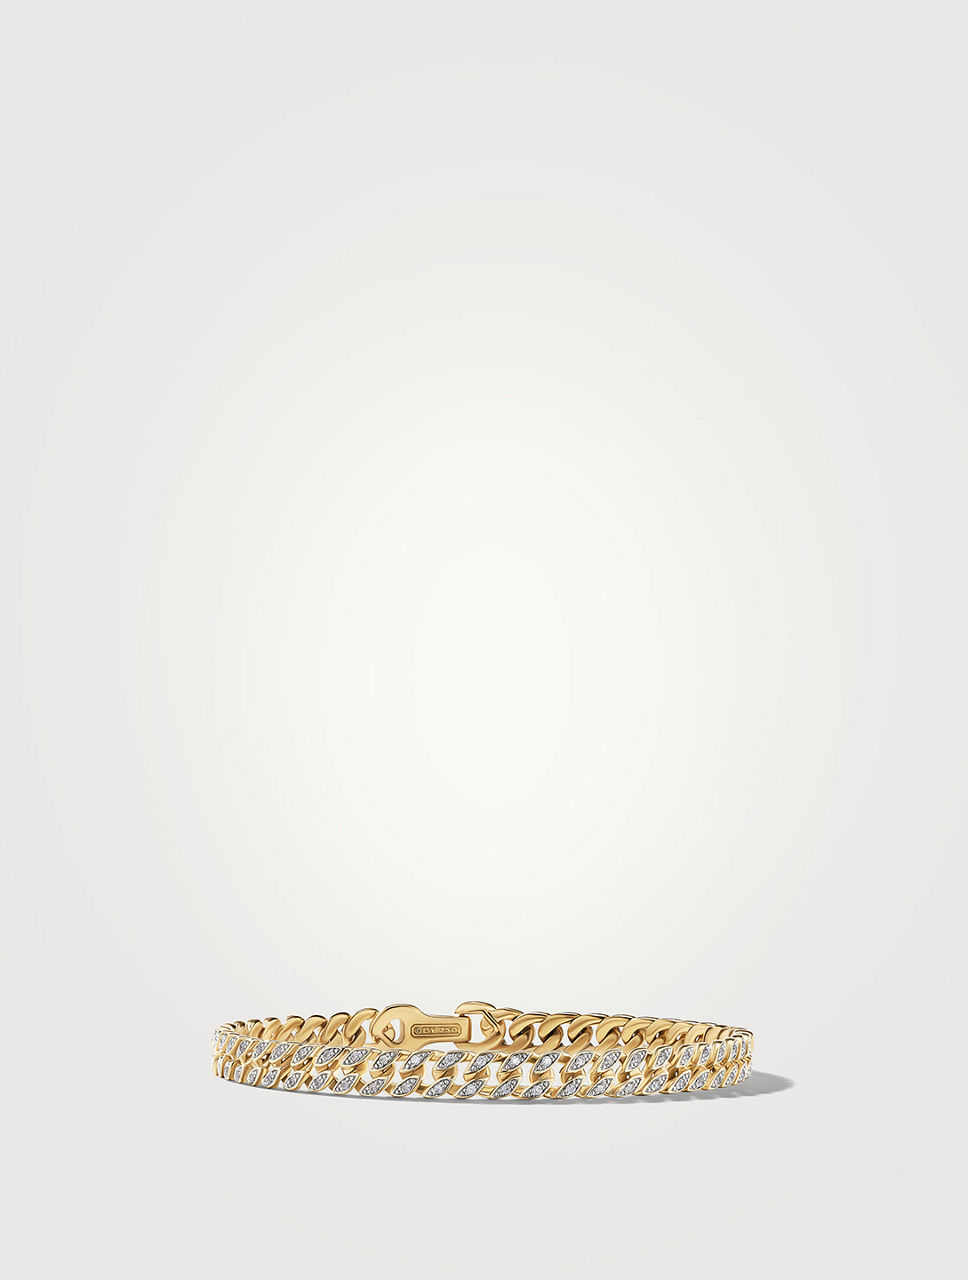 Curb Chain Bracelet 18k Yellow Gold With Diamonds, 6mm